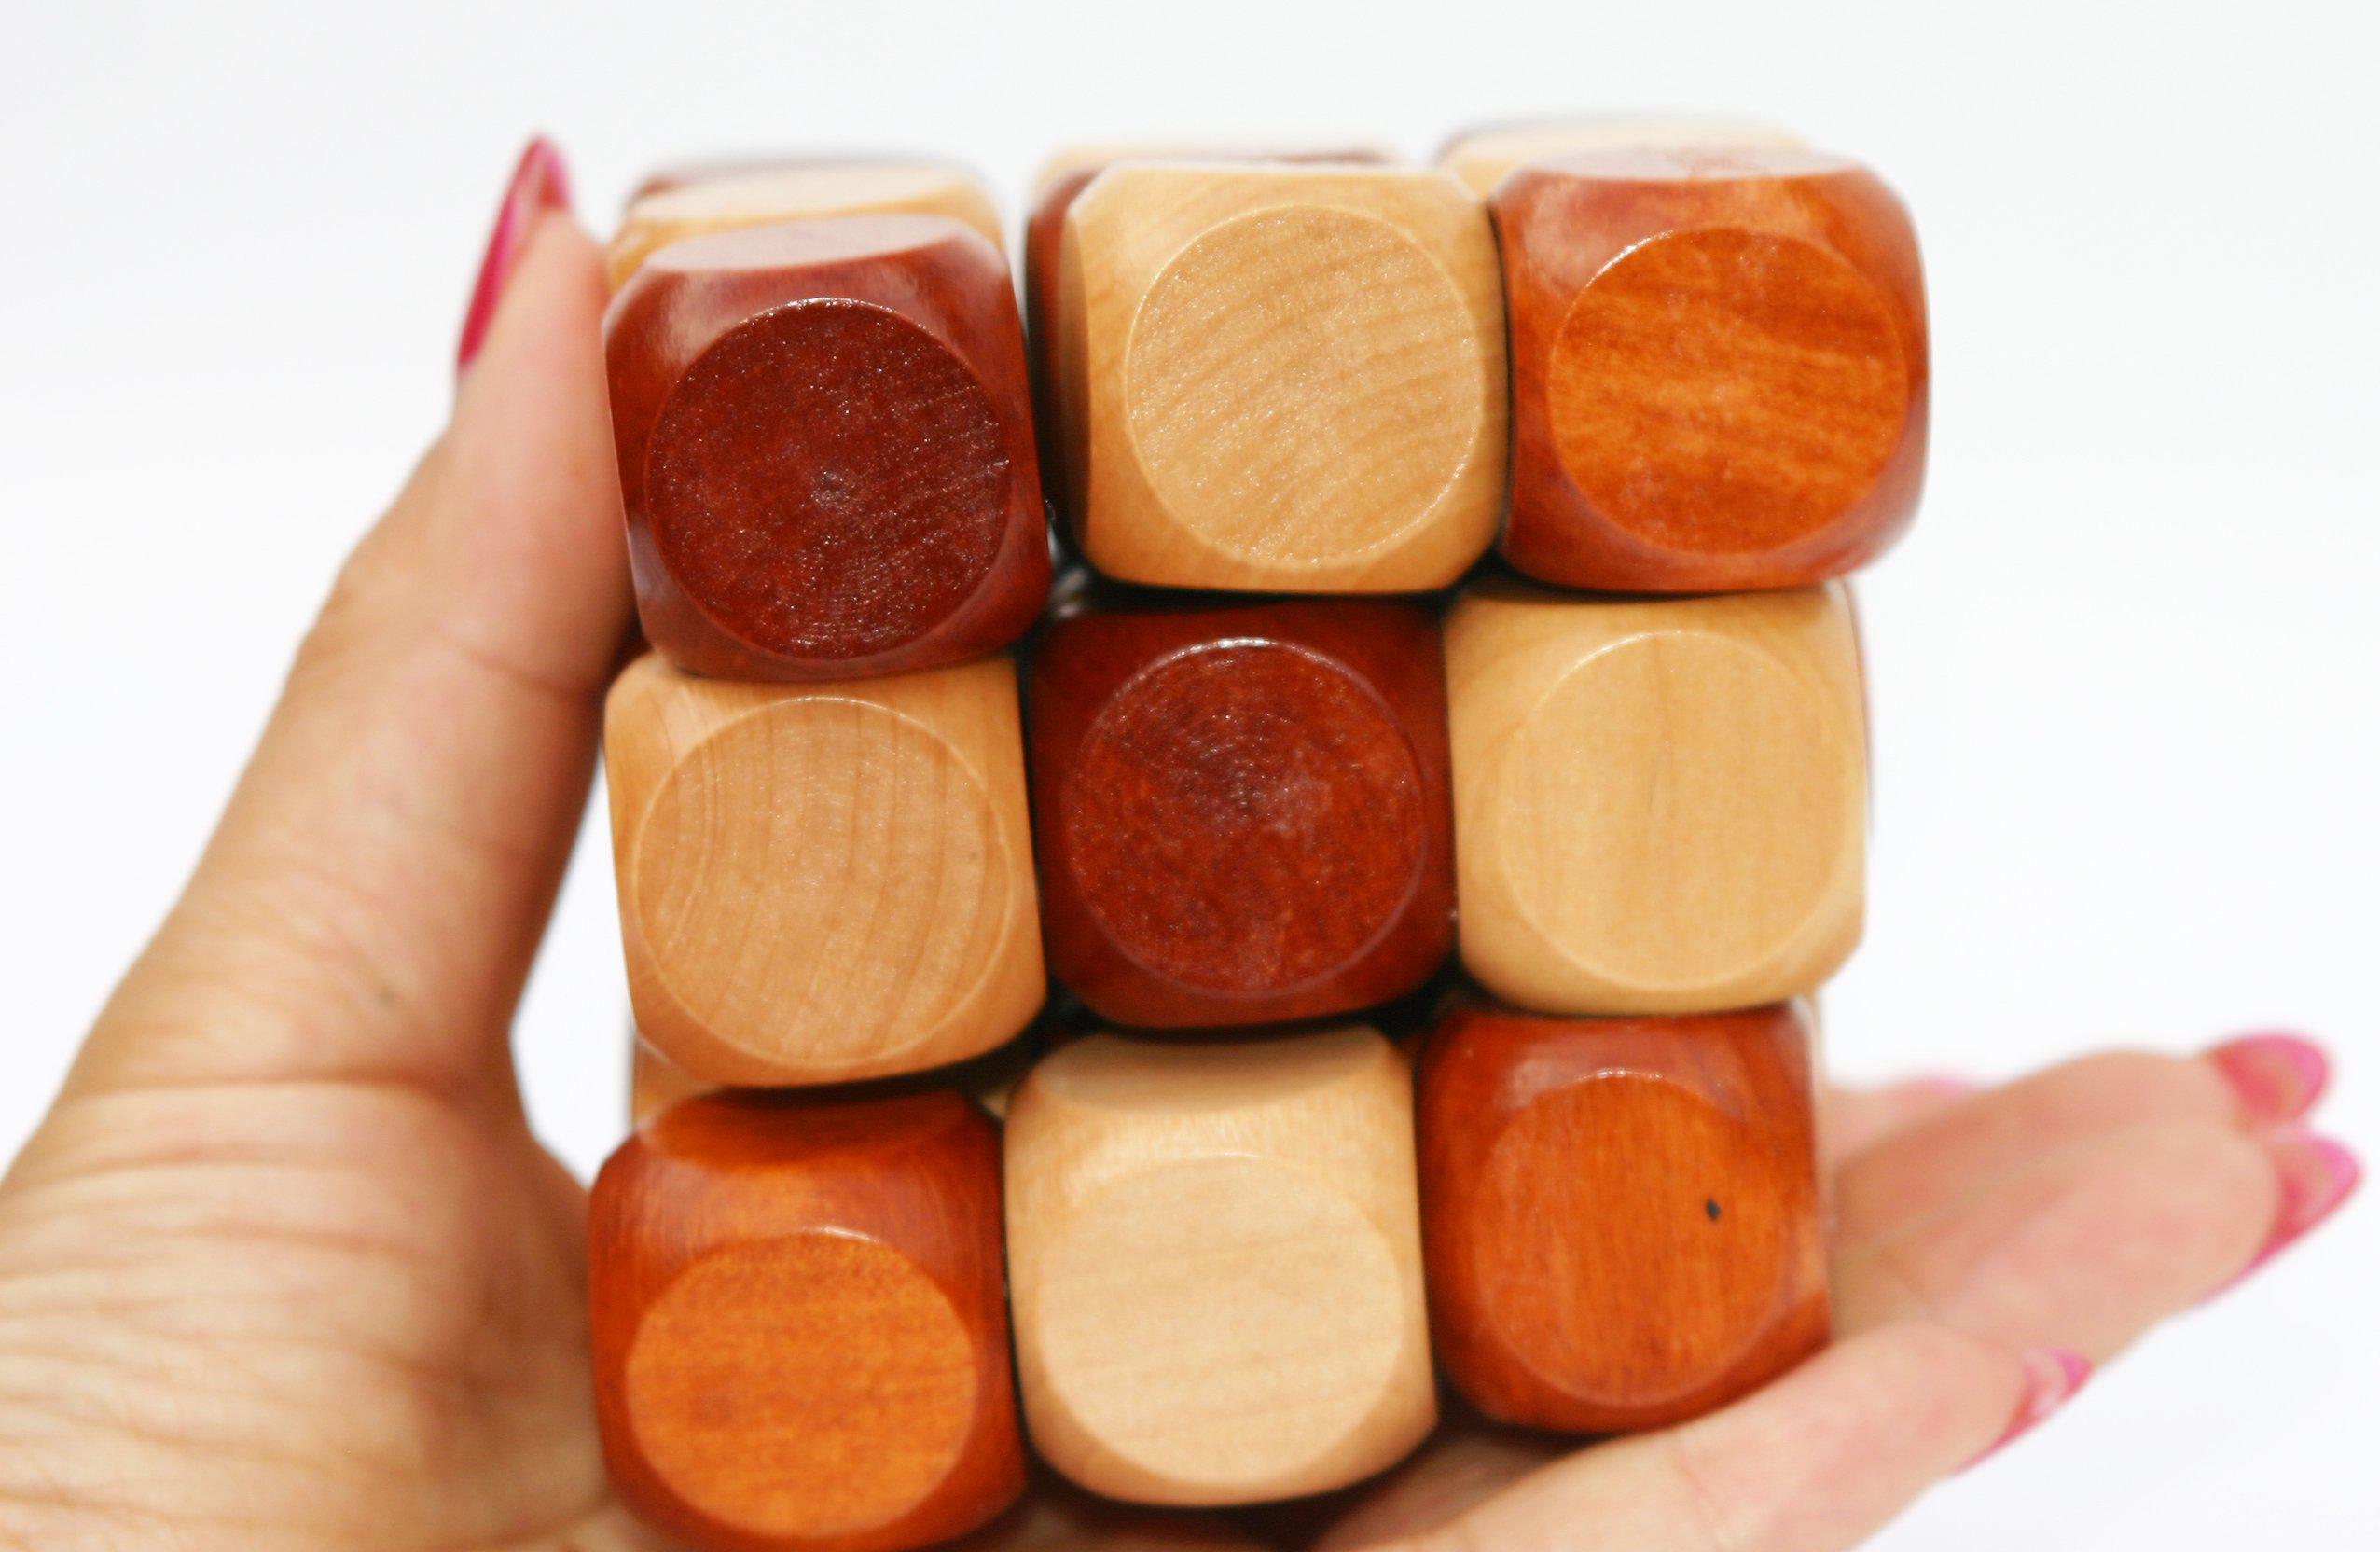 Toys of Wood Oxford  wooden twist cube iq puzzle - wooden brain teaser - brain teaser puzzle for children teenager adults - mens gift sets for him